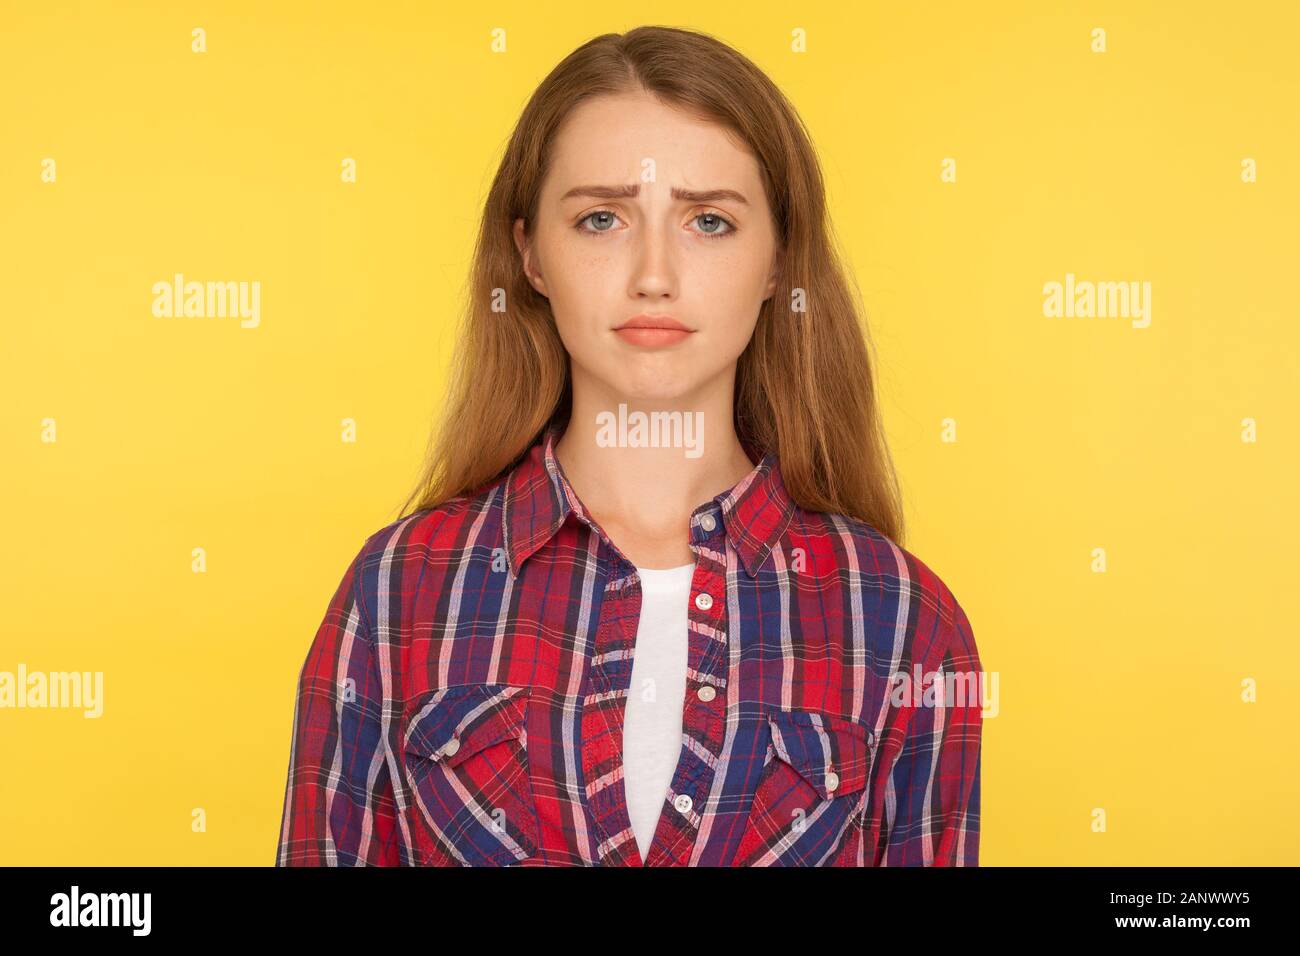 Portrait of unhappy ginger girl in checkered shirt frowning and looking at camera with upset dismal expression, feeling insulted, resentful facial emo Stock Photo